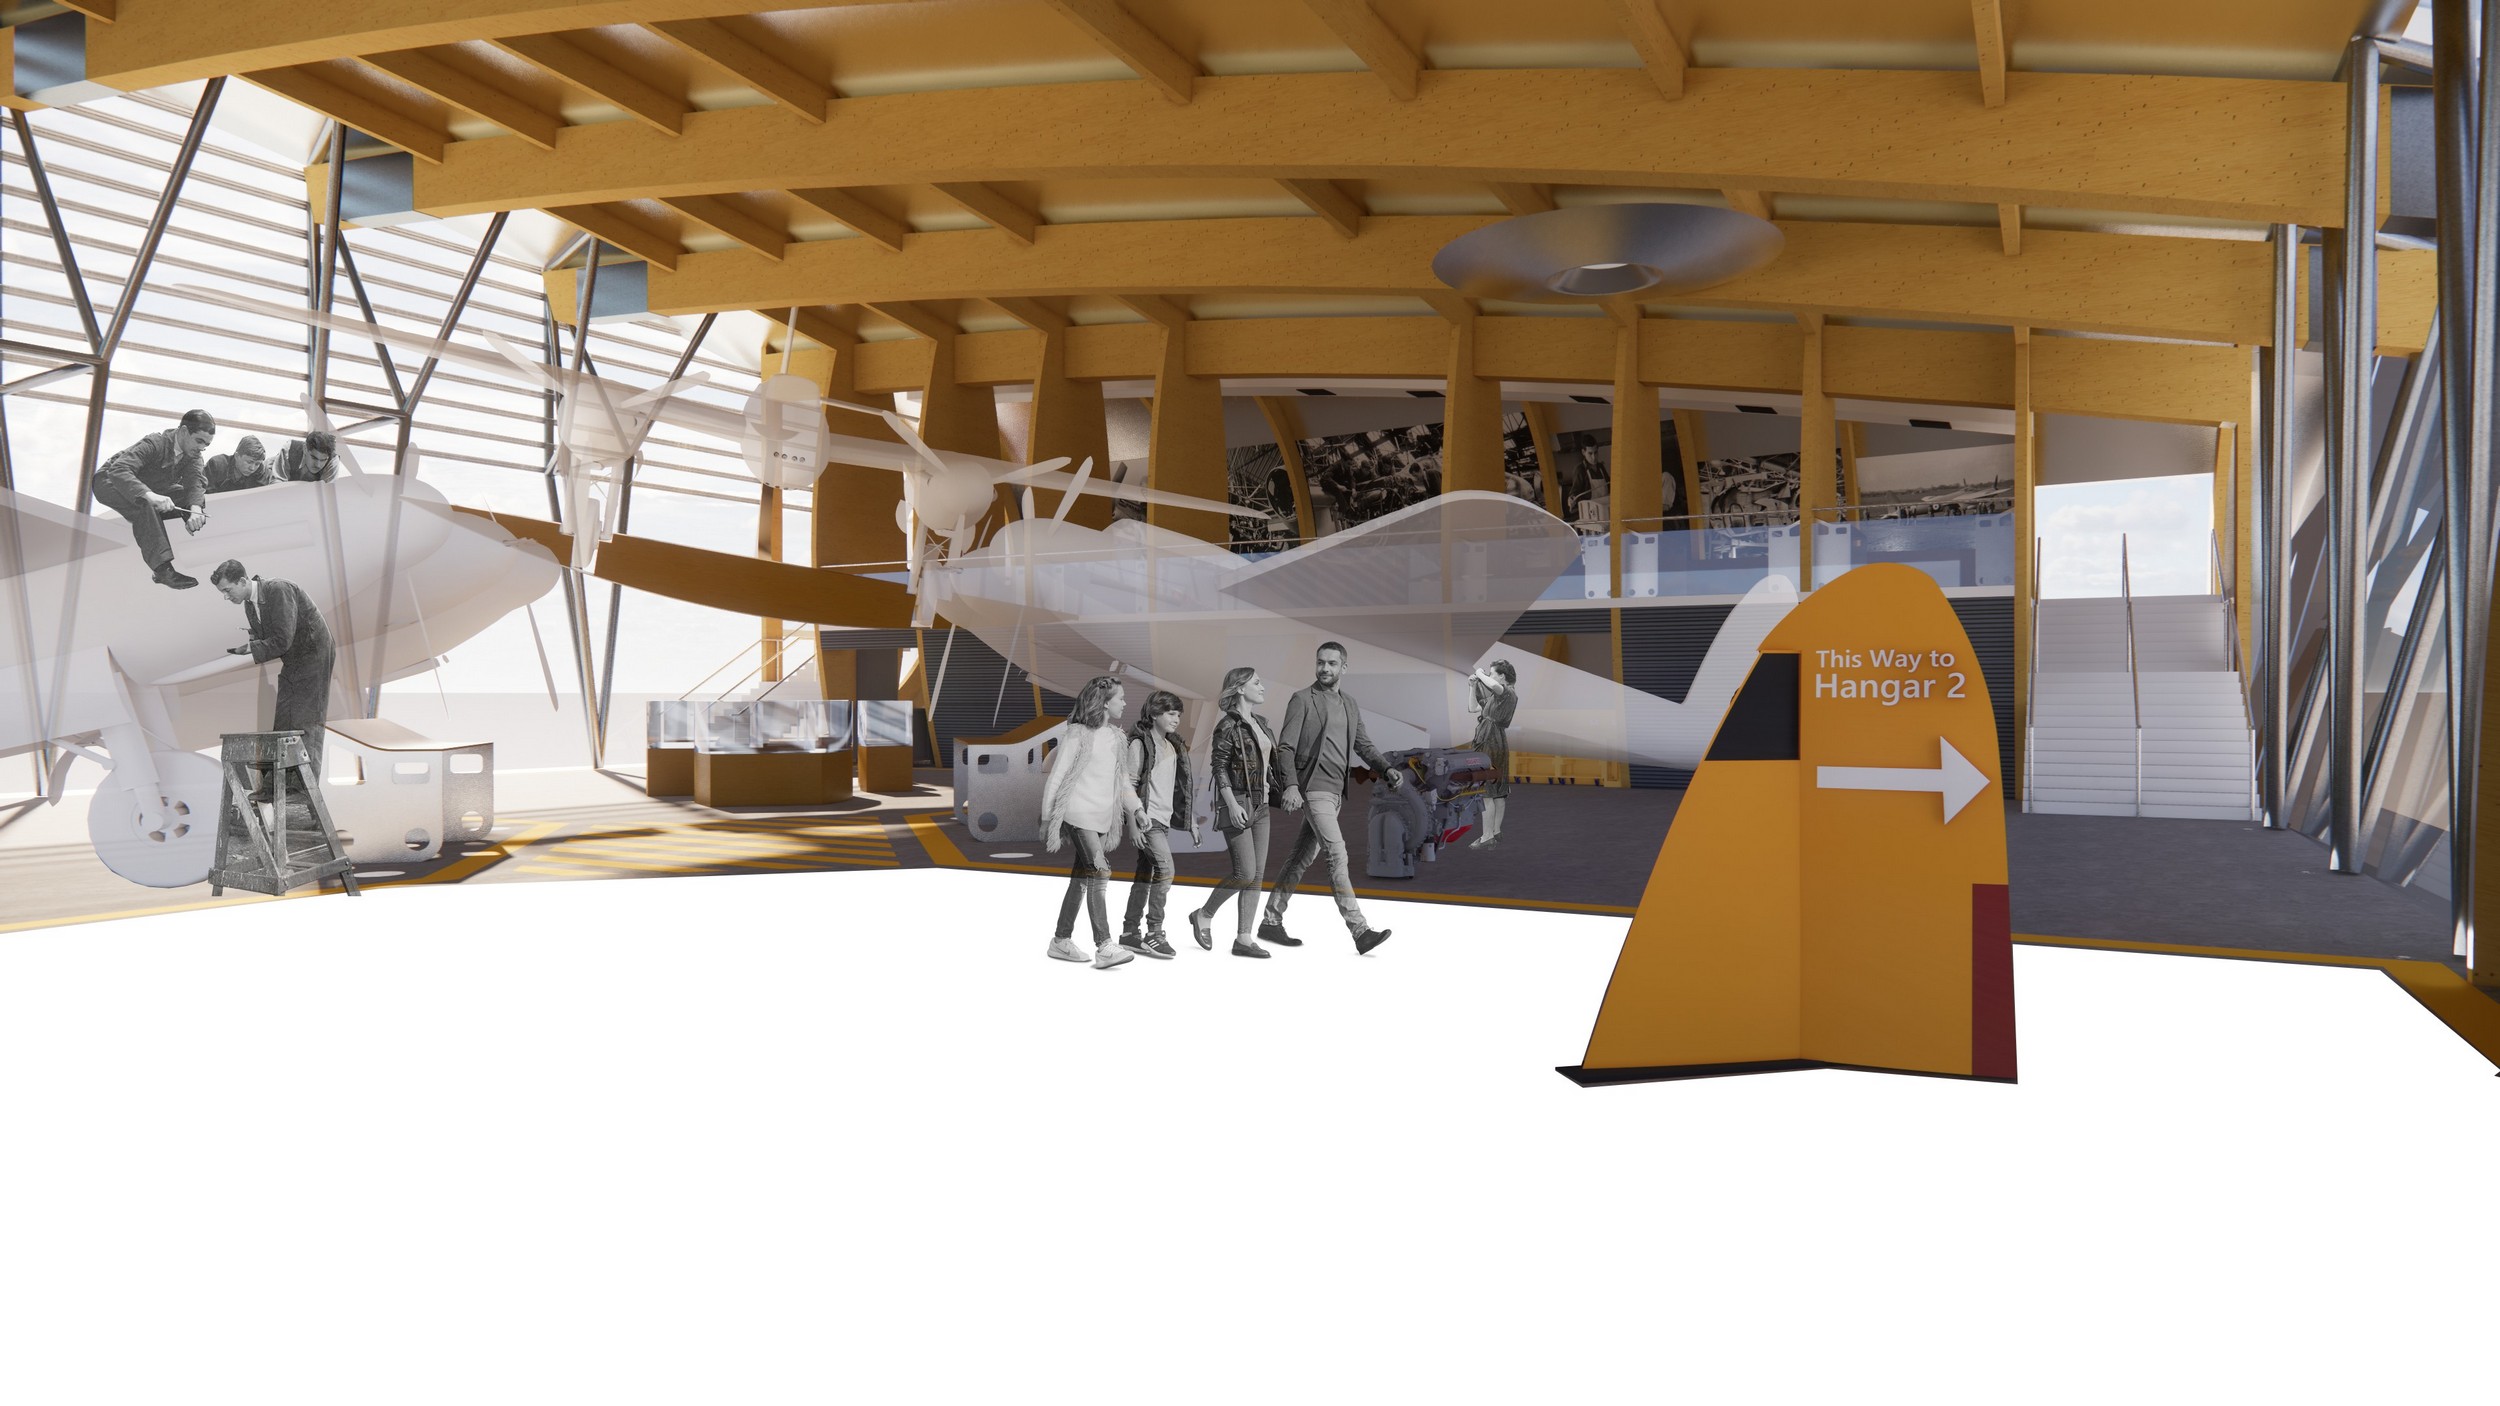 Final concept render by Alistair Badger showing the Hangar Display Floor and exhibition space behind.